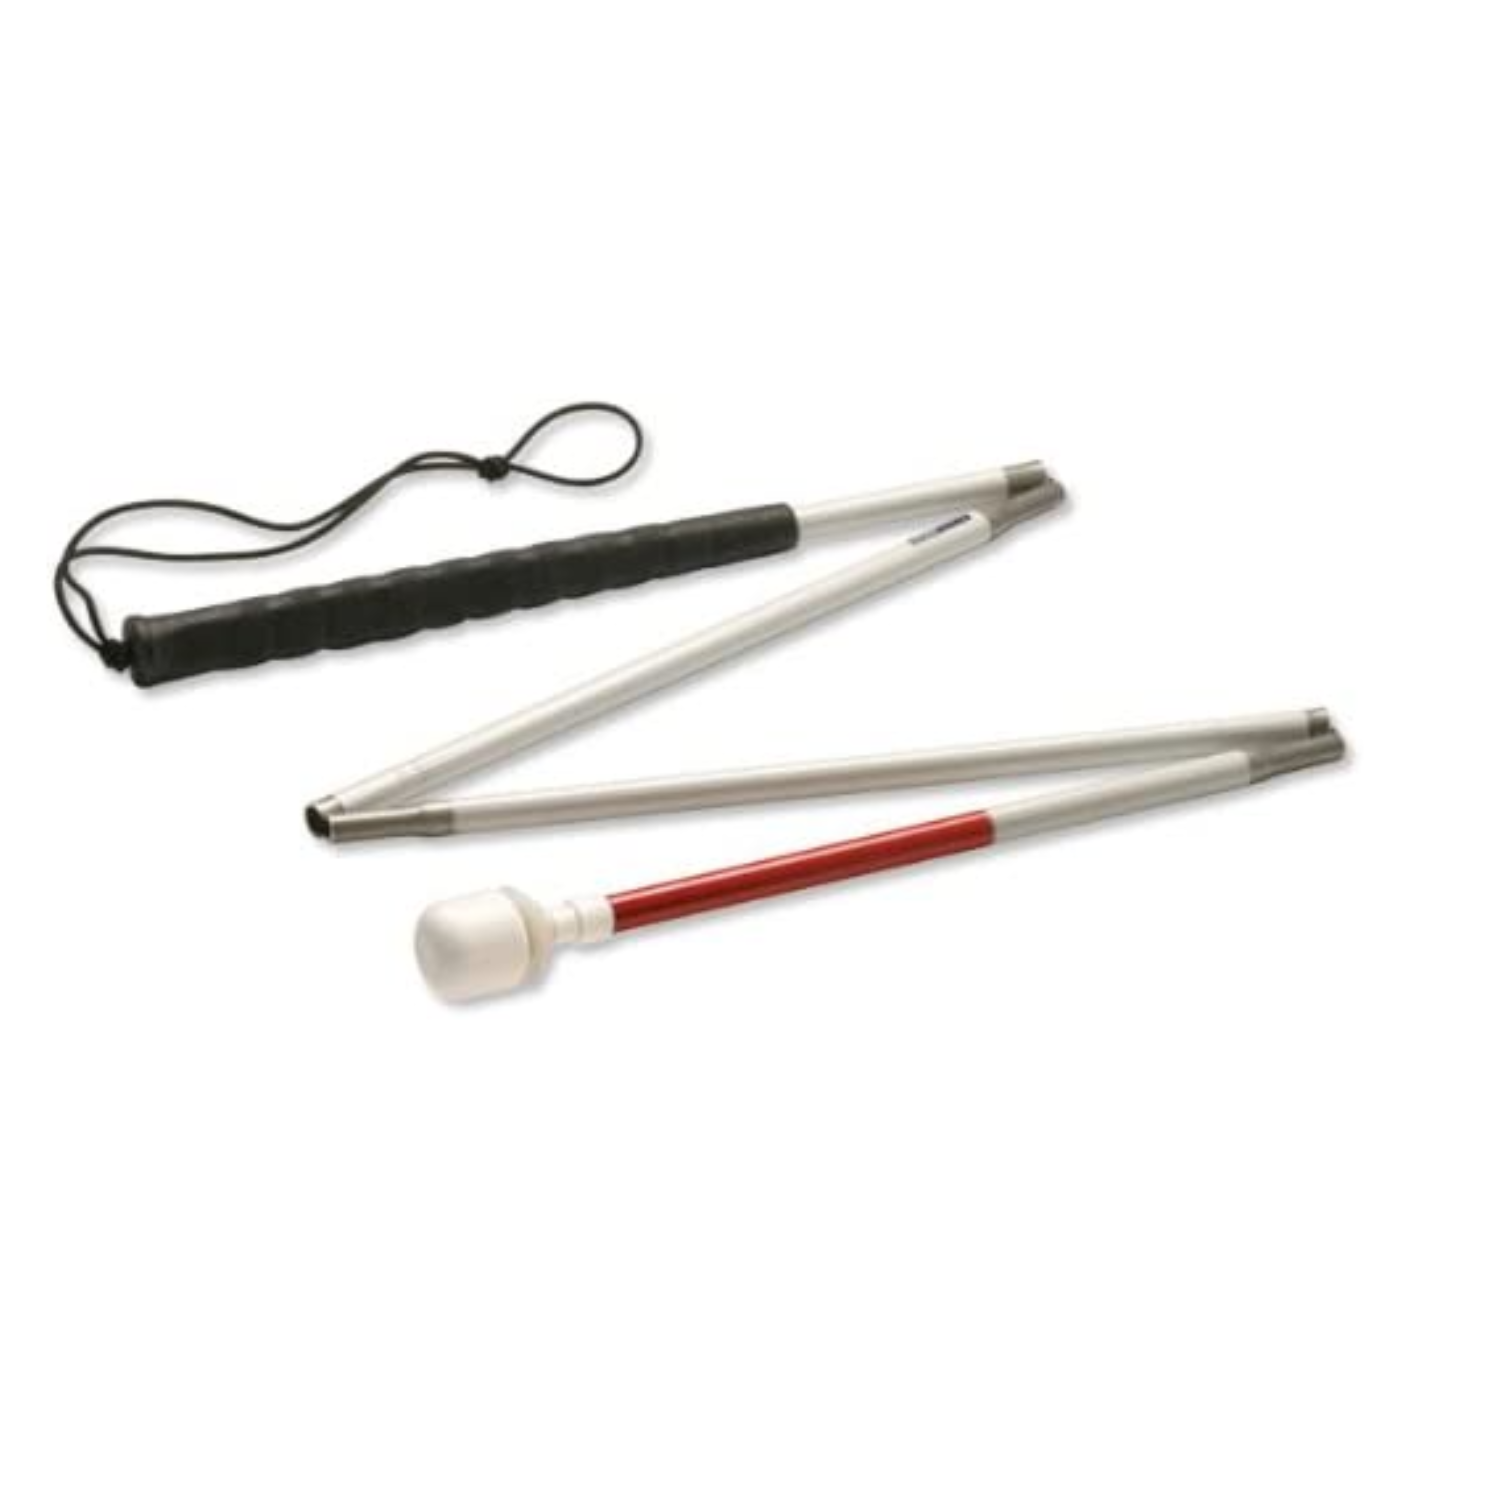 Image of a white aluminum folding mobilitry cane with a roller marshmallow tip from Ambutech.